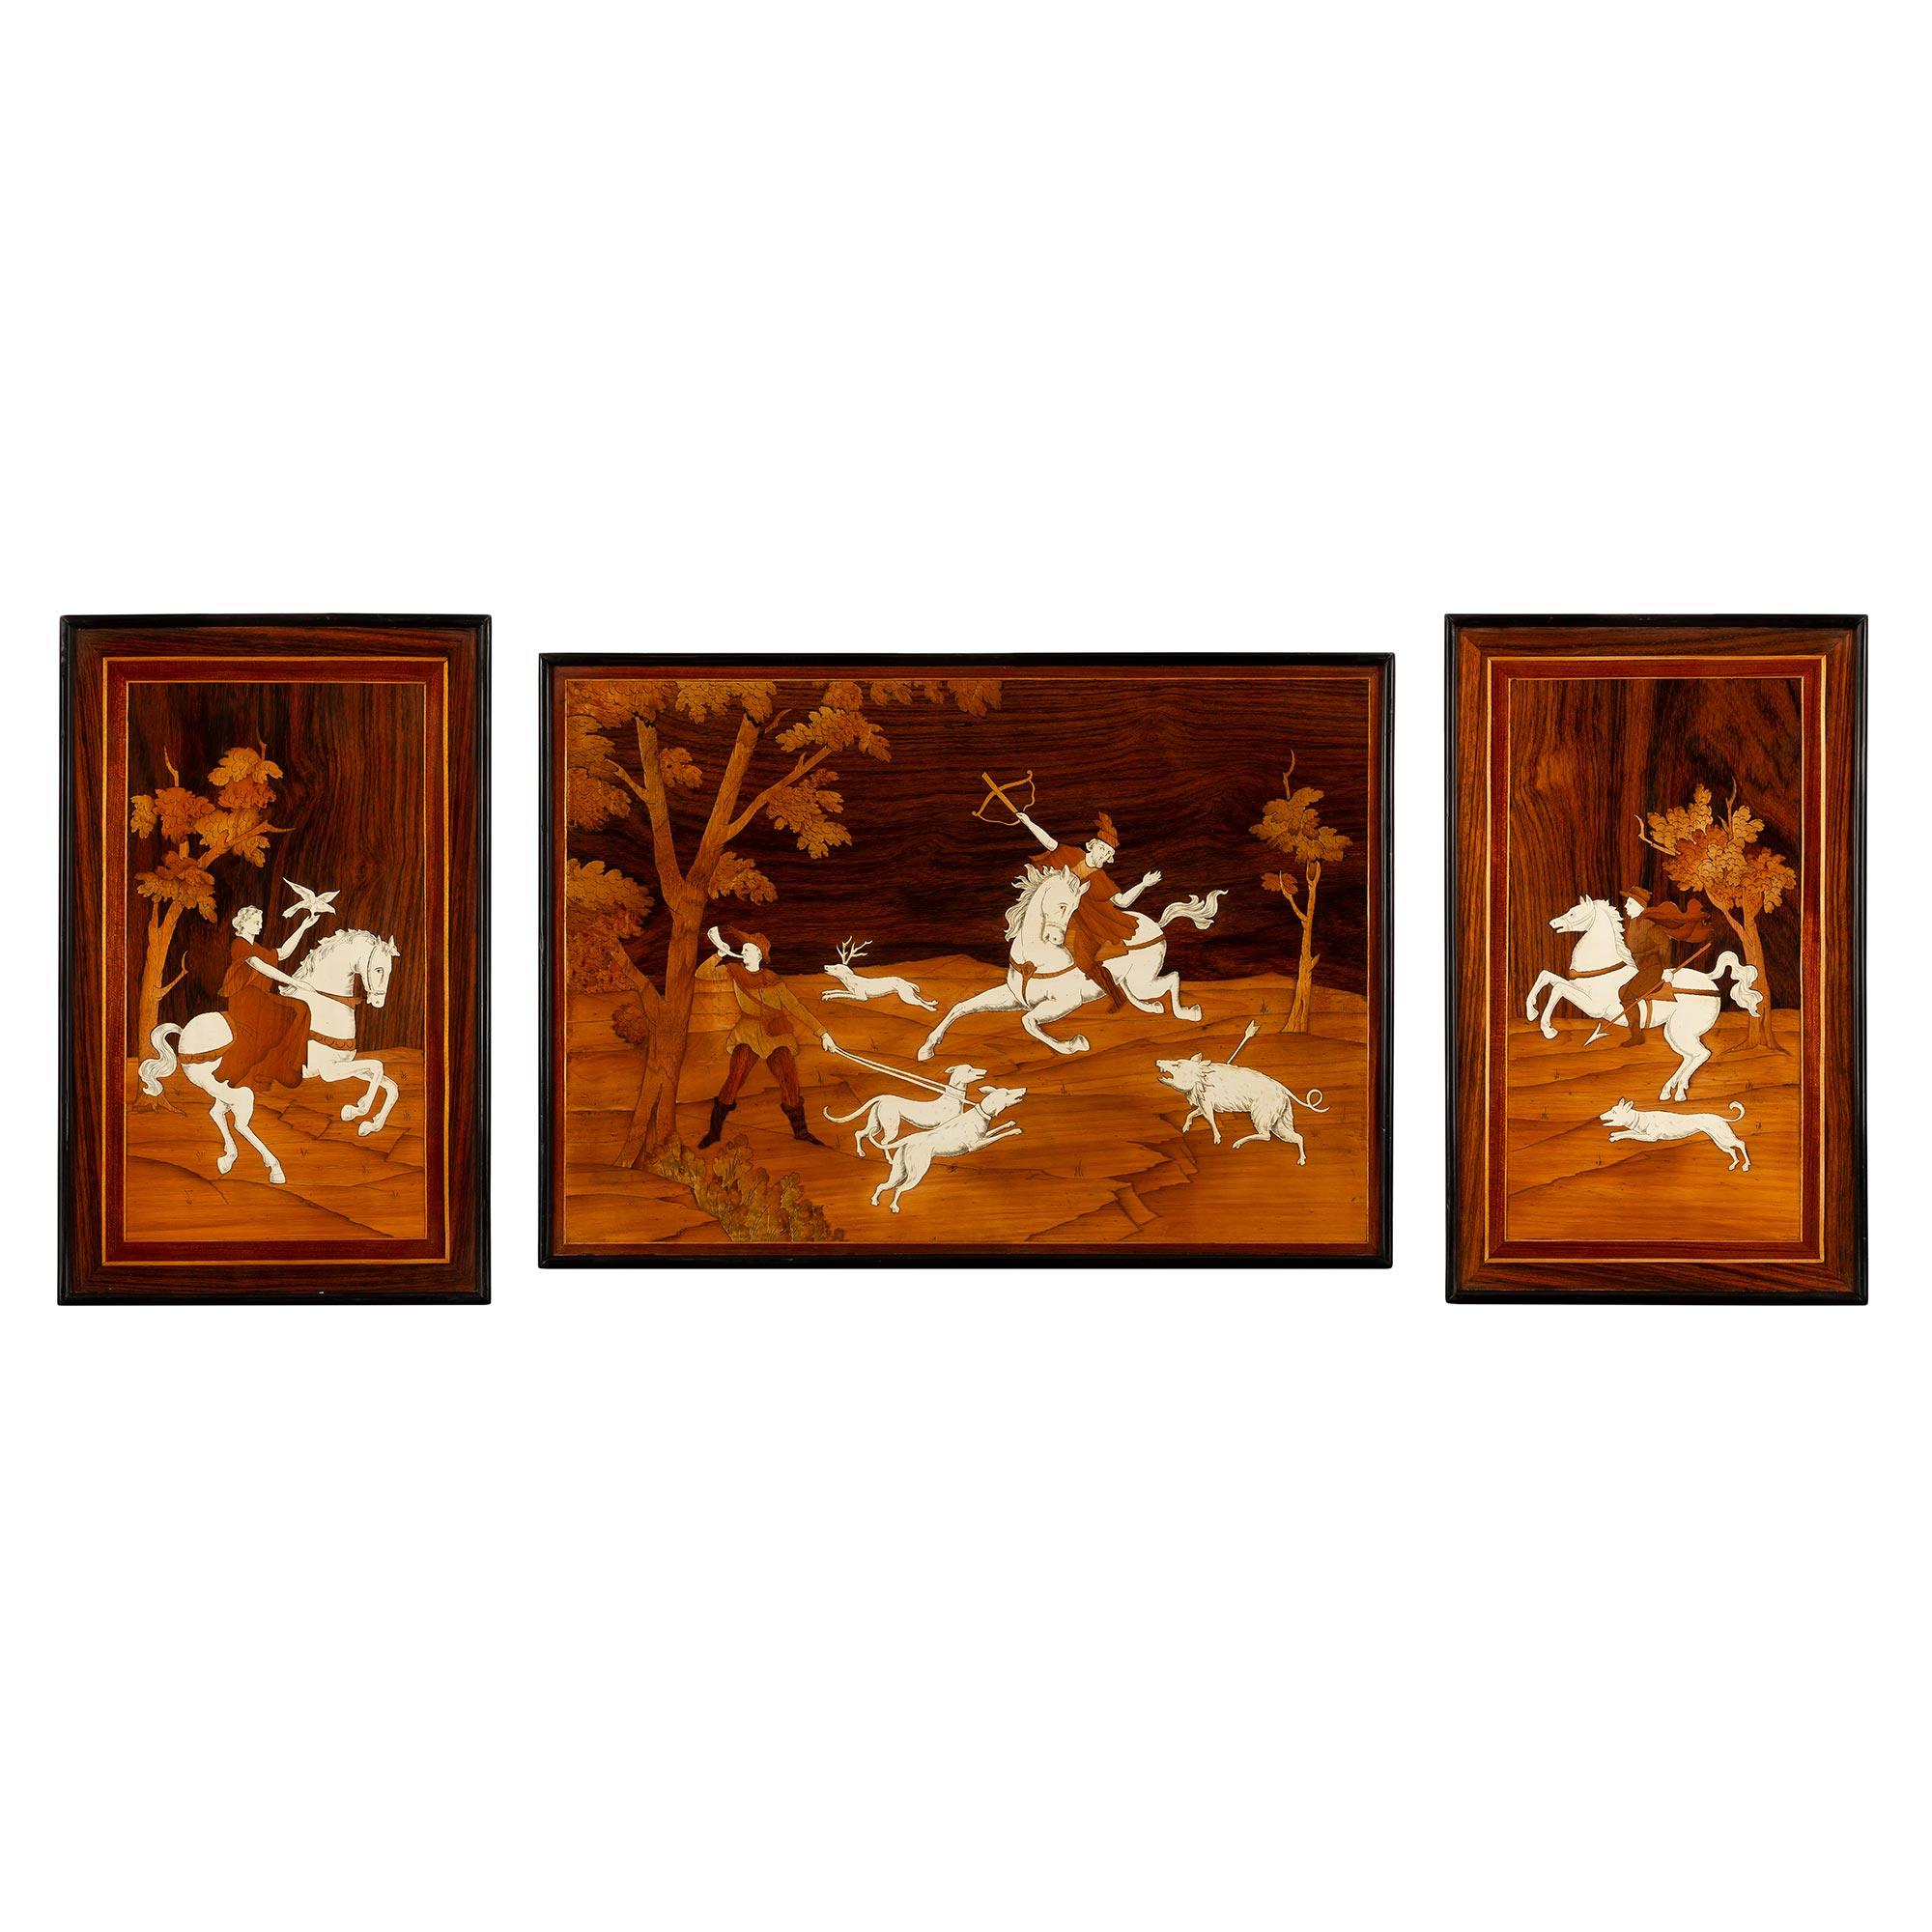 Italian 19th Century Decorative Marquetry Wall Panels For Sale